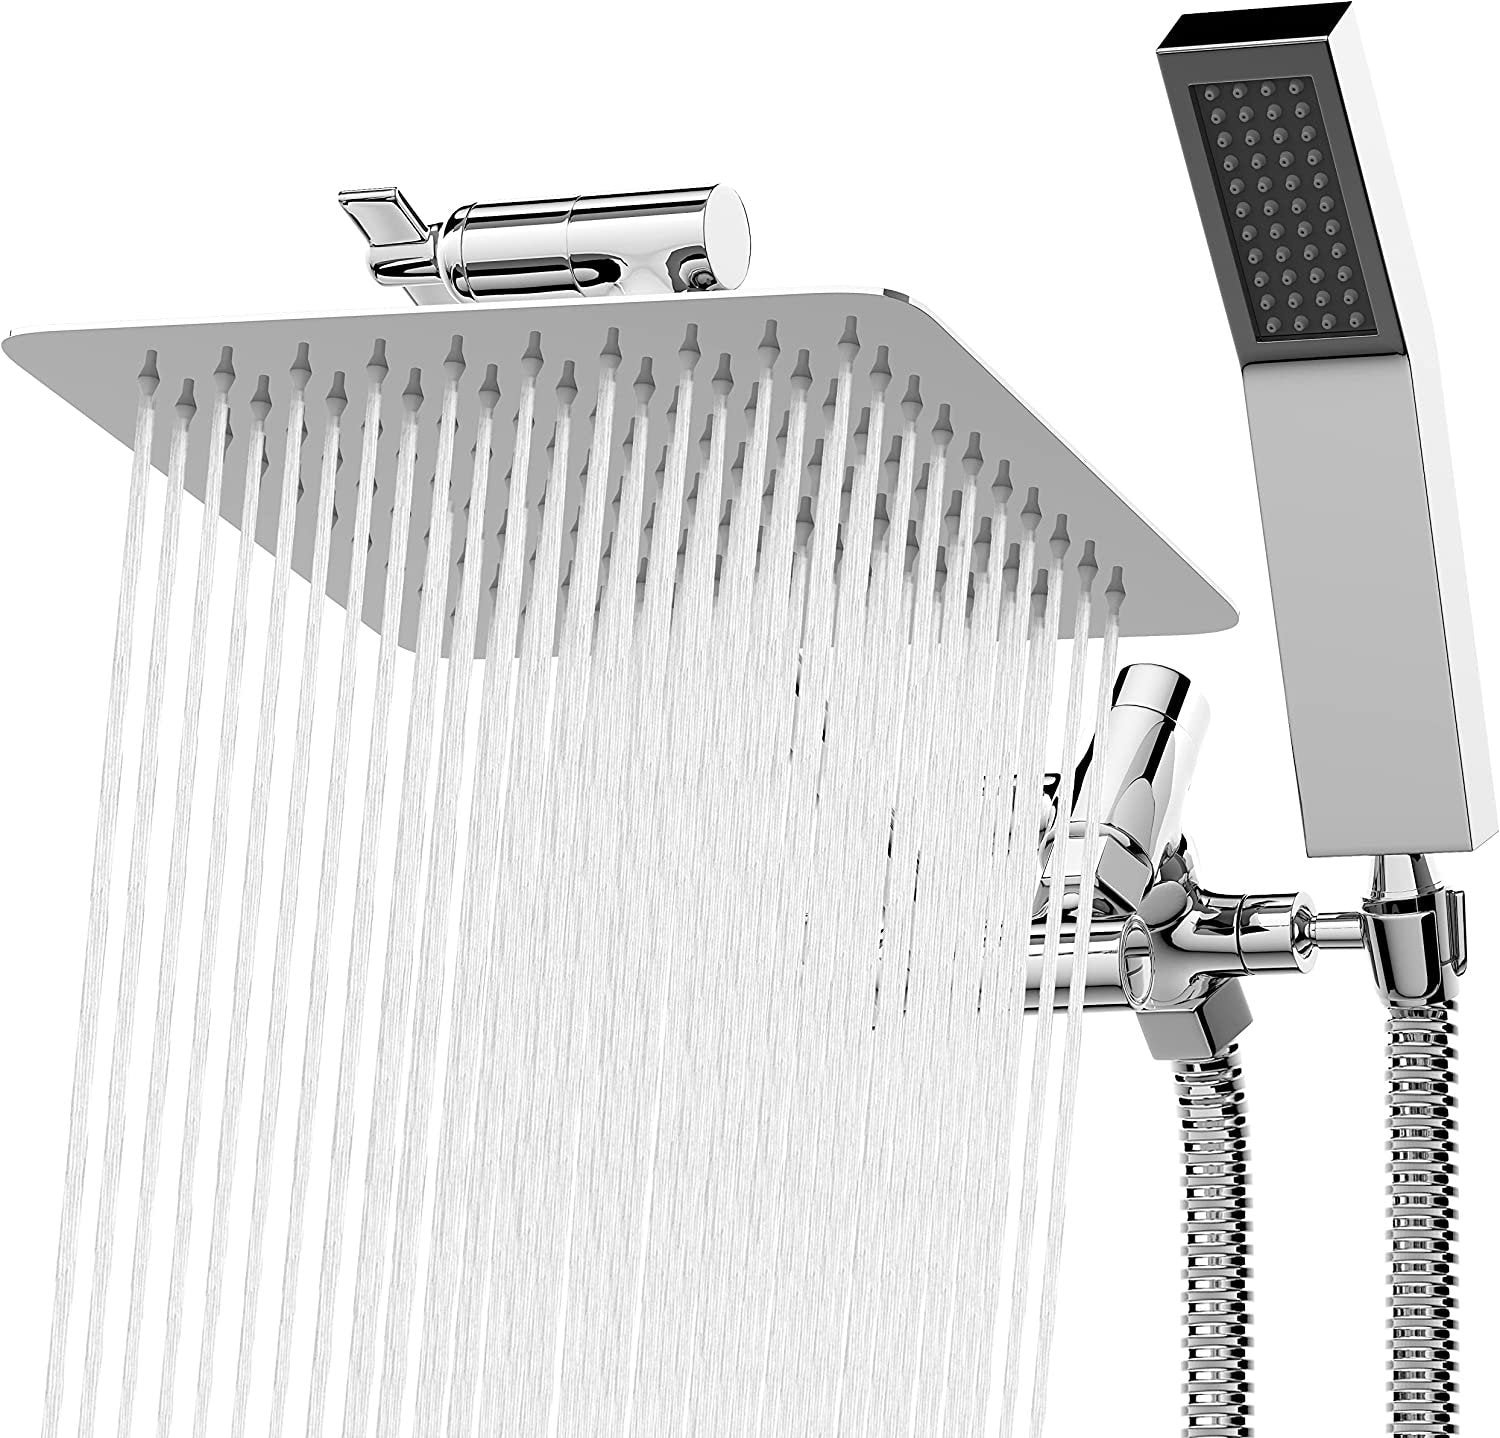 10" Long Shower Head with Handheld - 3 Mode Rain Shower Head with Shower Diverter - High Pressure Shower Head with Extension Arm & Shower Hose -Bathing Kids & Washing Pets (1.8 GPM, Deluxe Chrome)